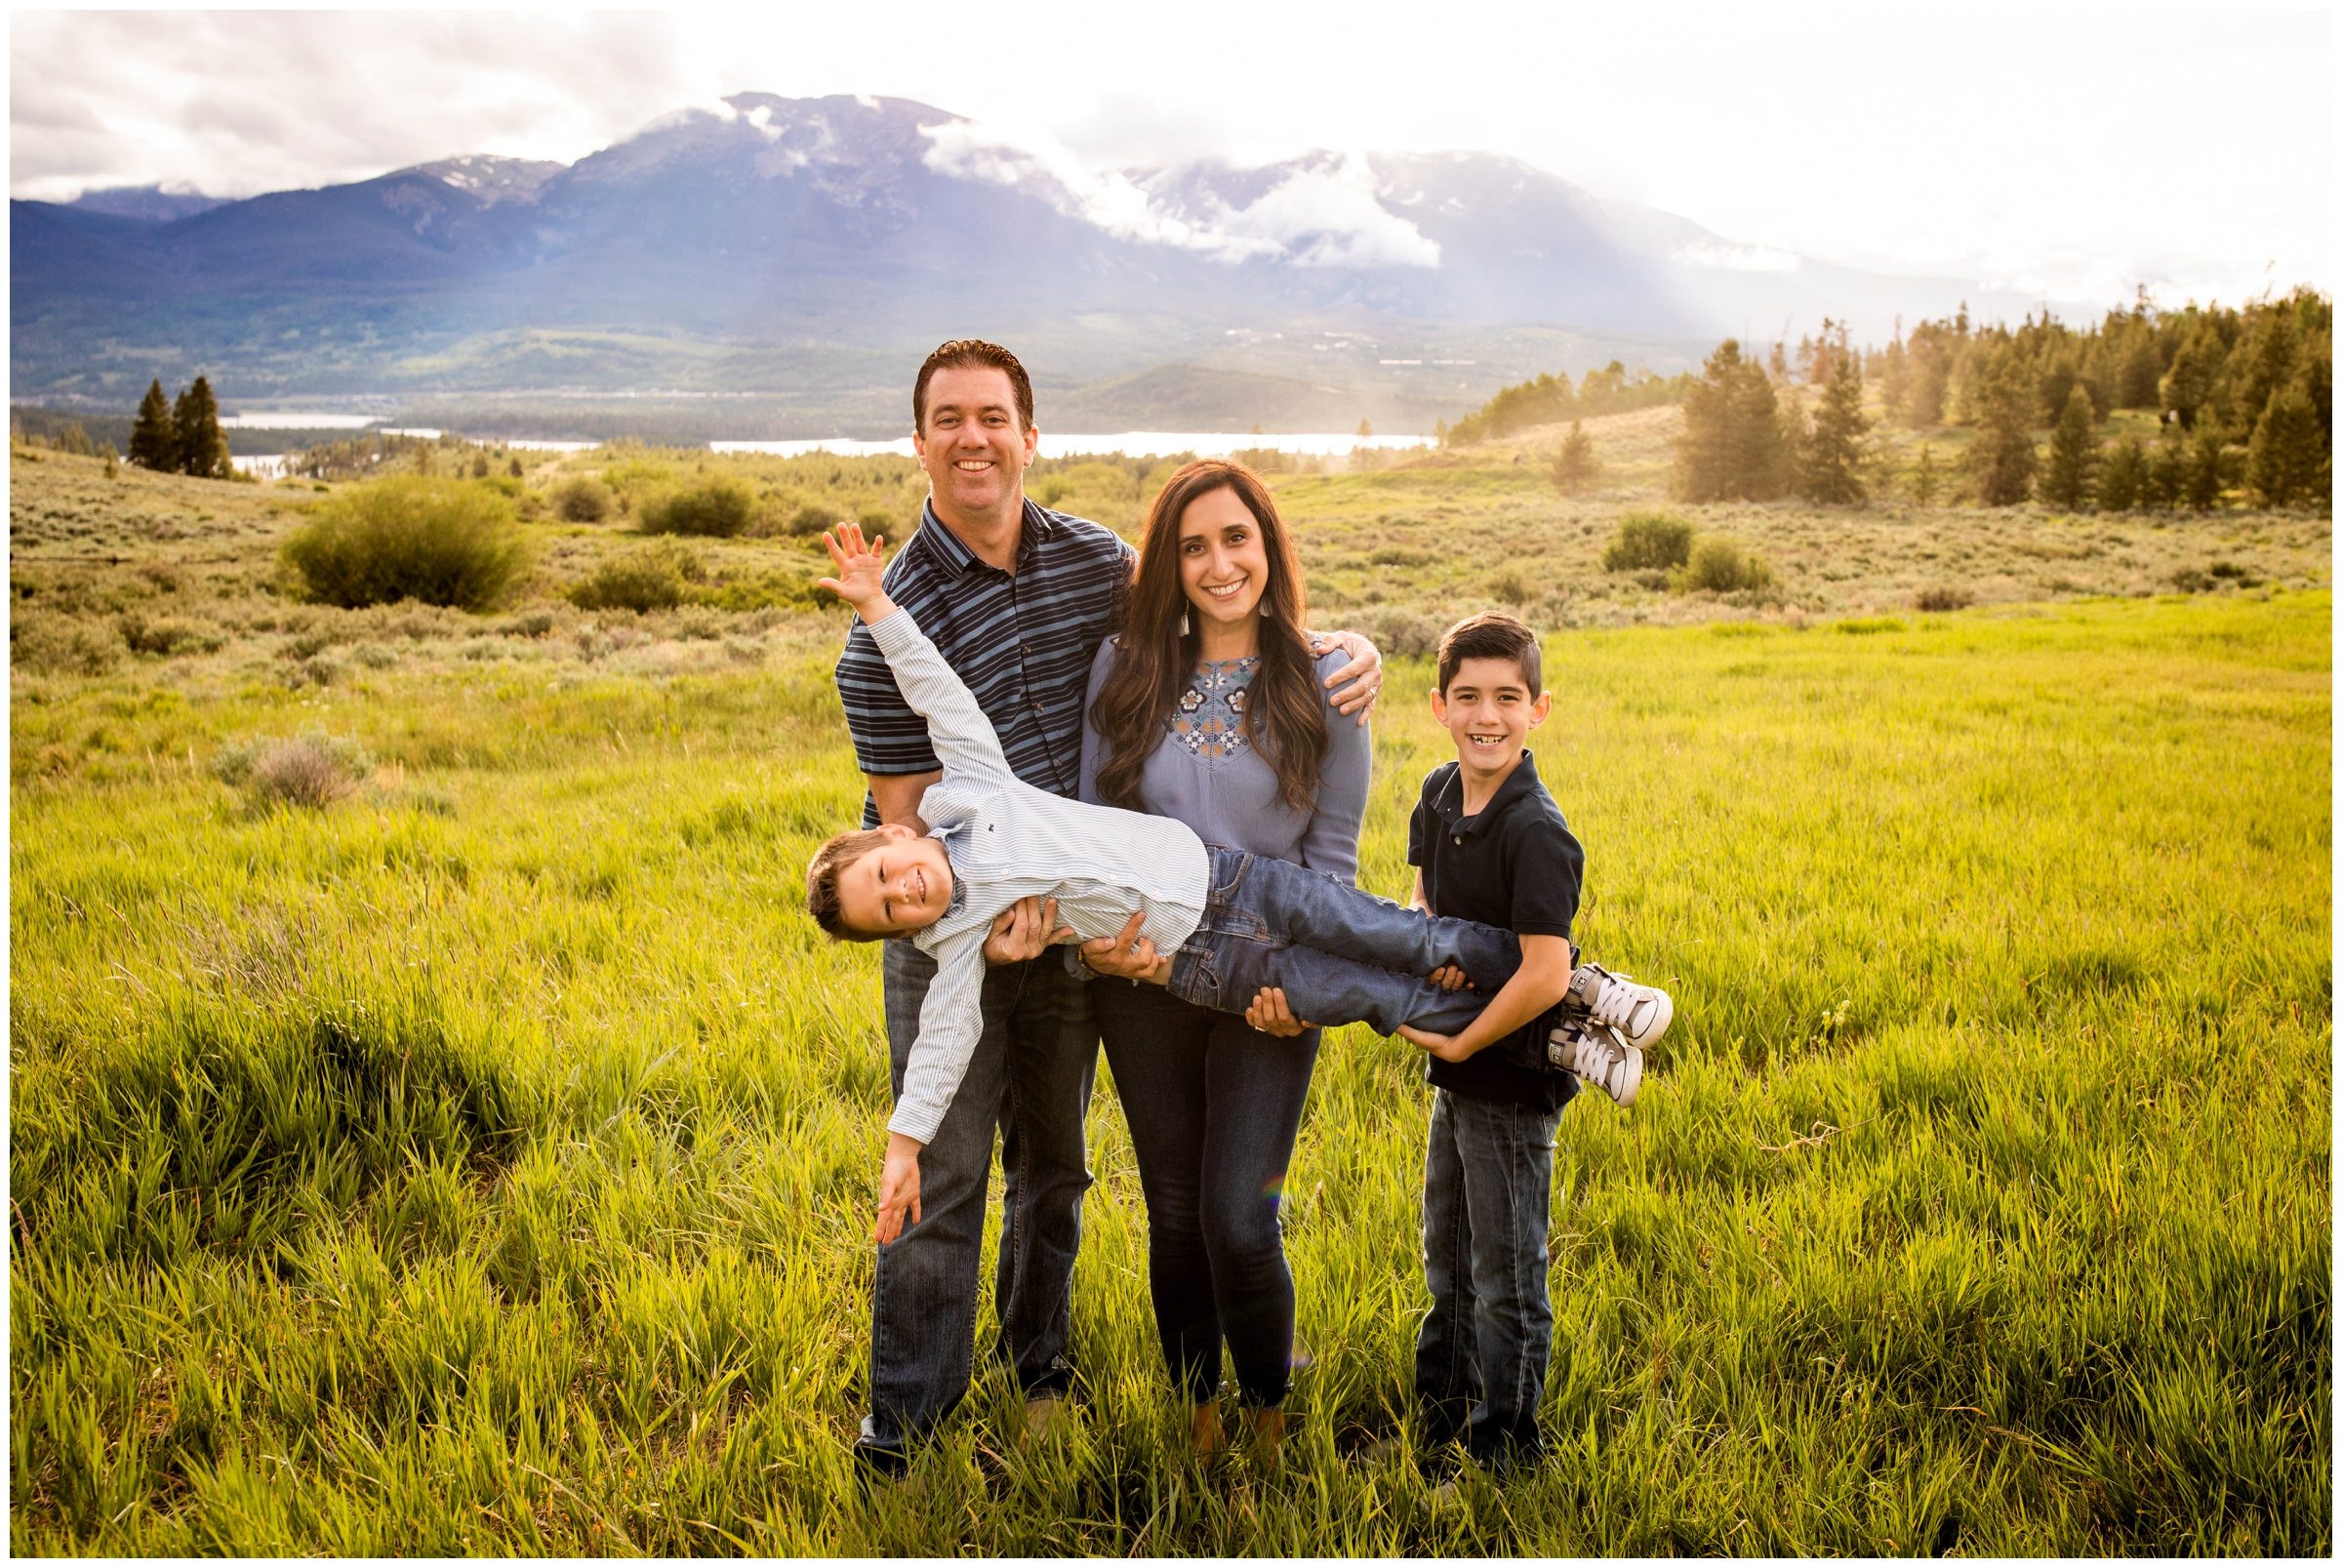 fun candid family photos in a field in the Colorado mountains by Plum Pretty Photography 